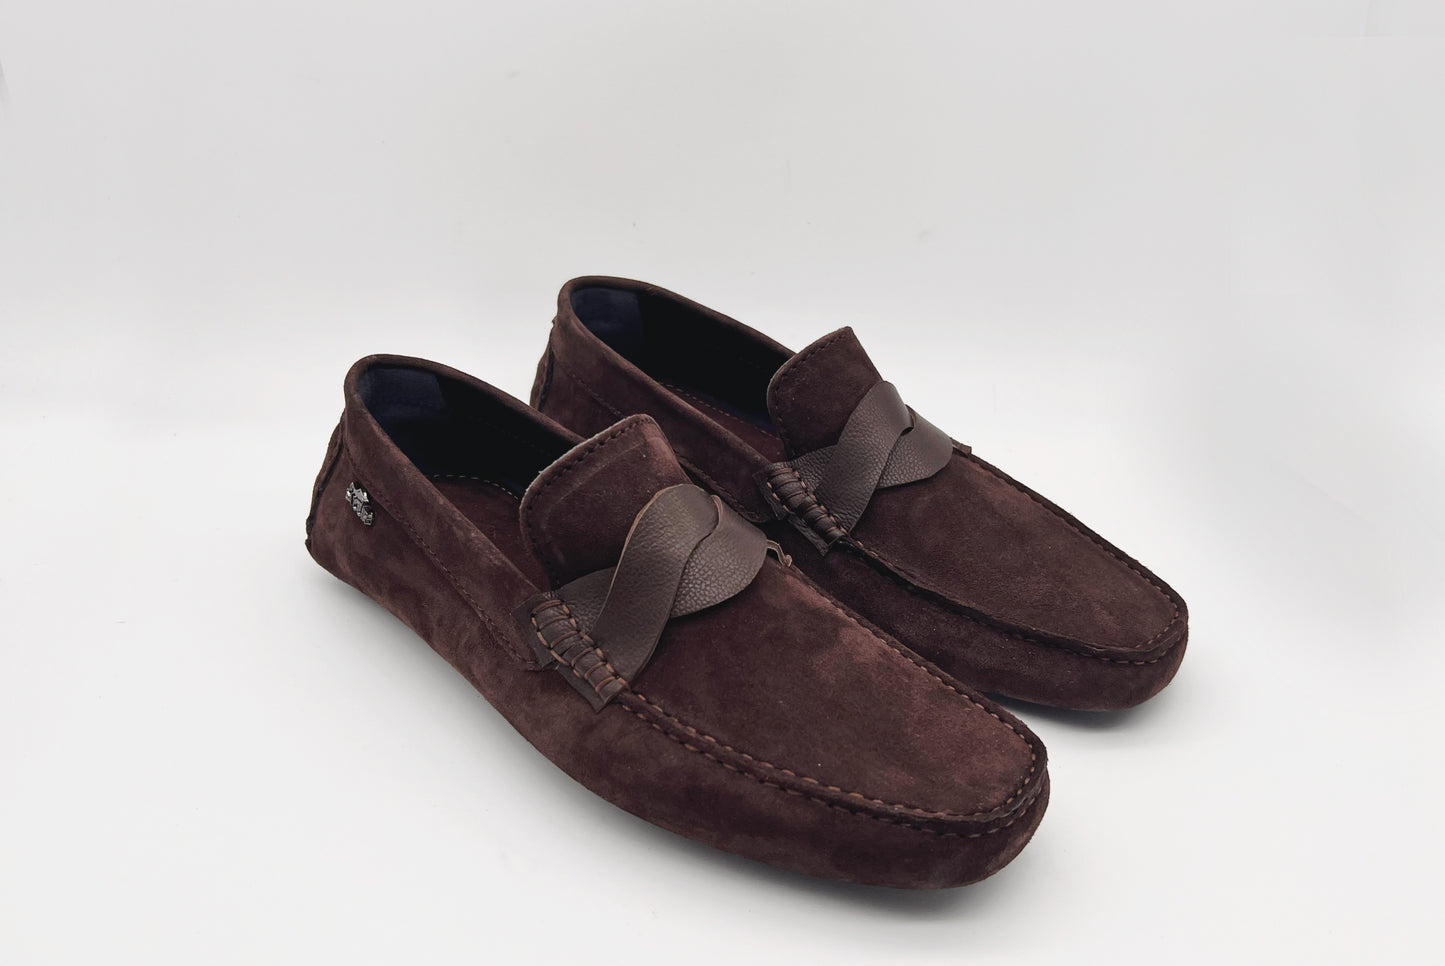 Suede T Driving Shoes